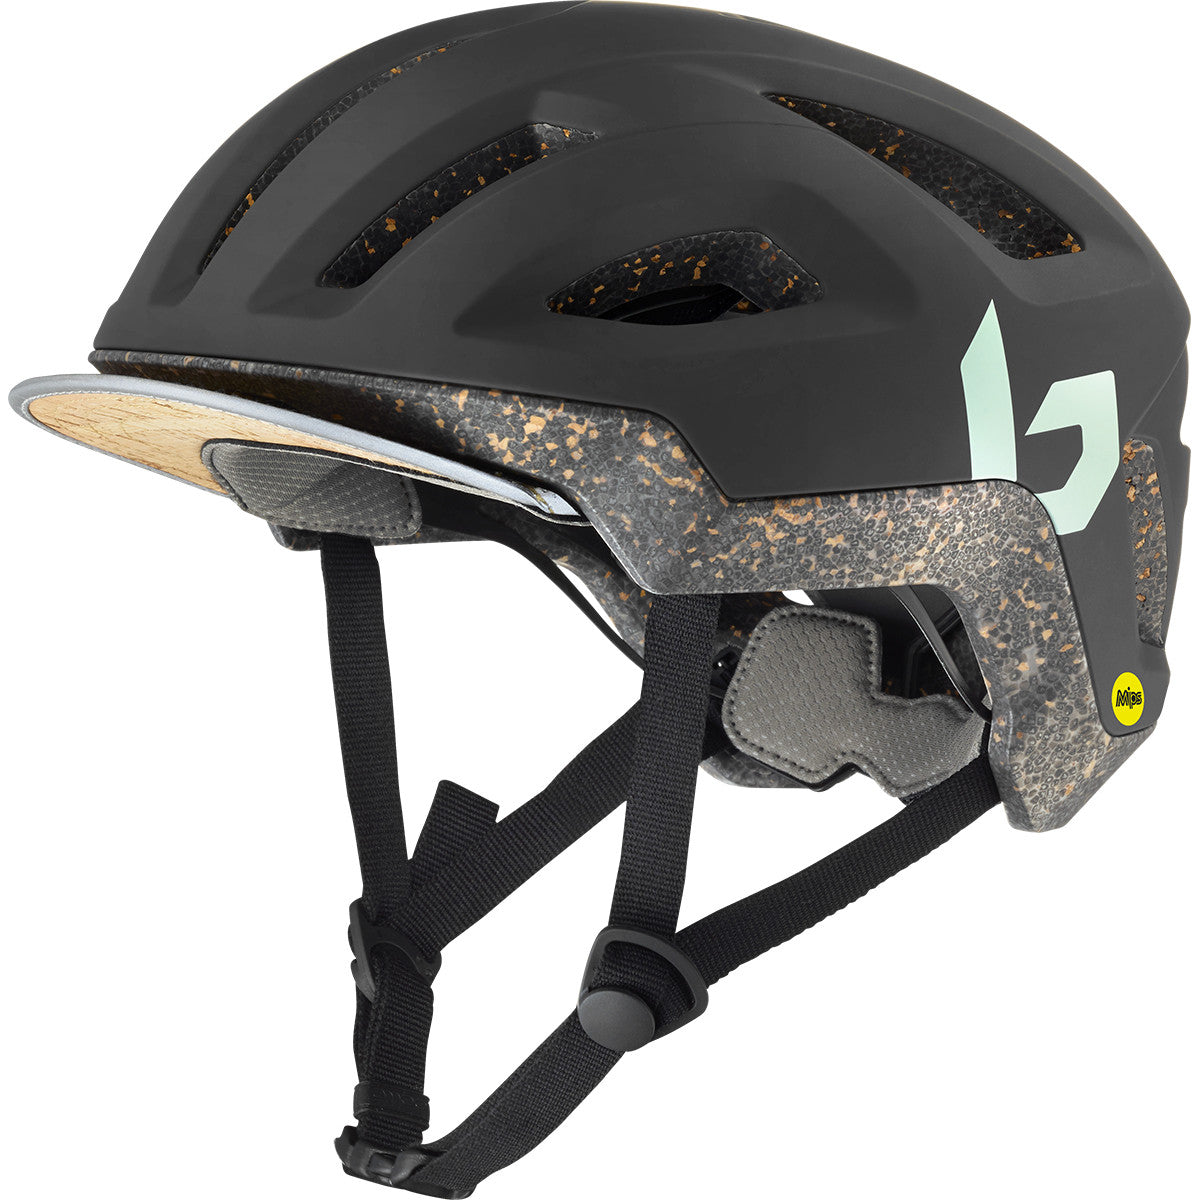 Bolle Eco React Mips Cycling Helmet